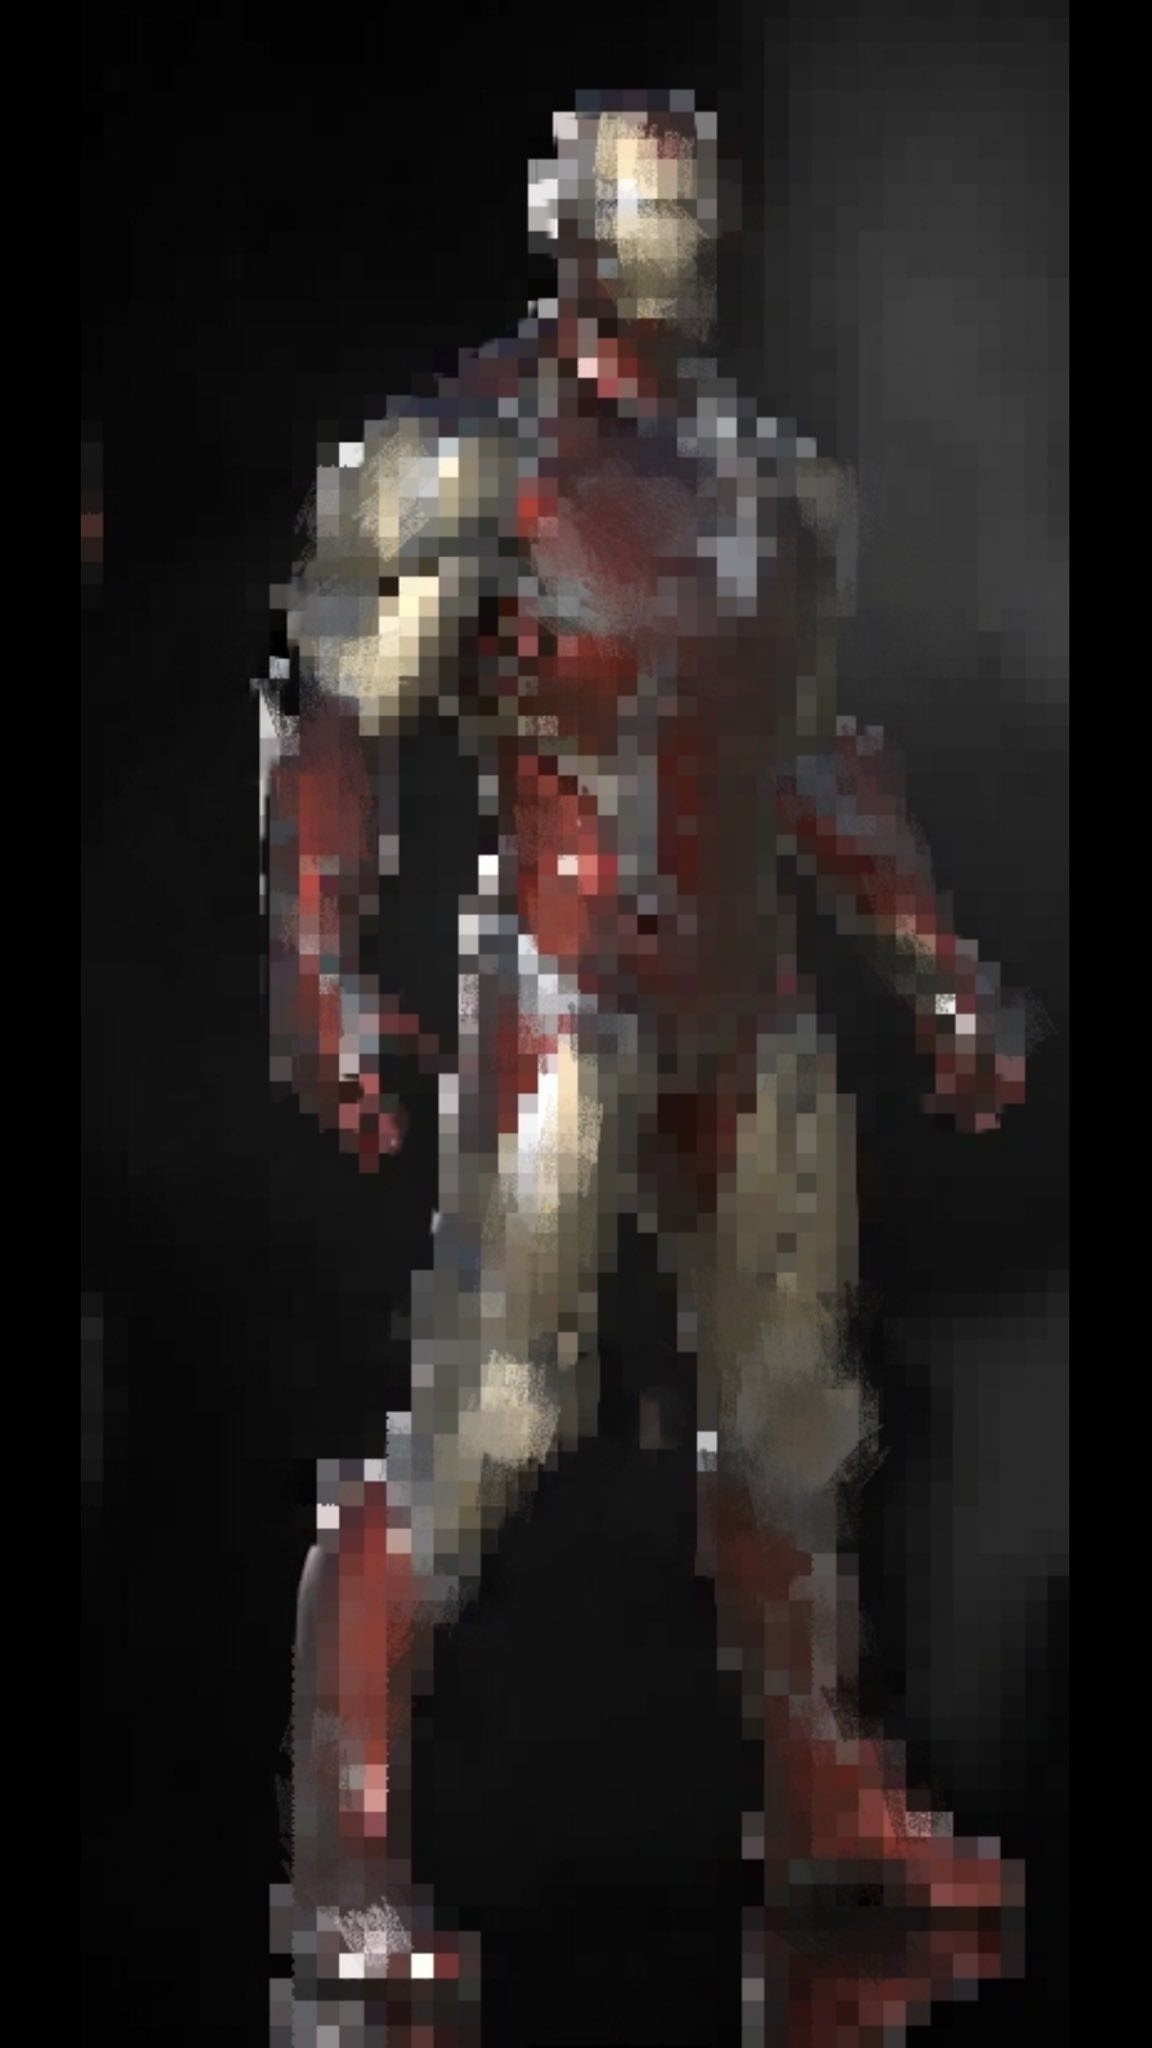 More Leaked Avengers Photos Reveal Classic Iron Man Suit And